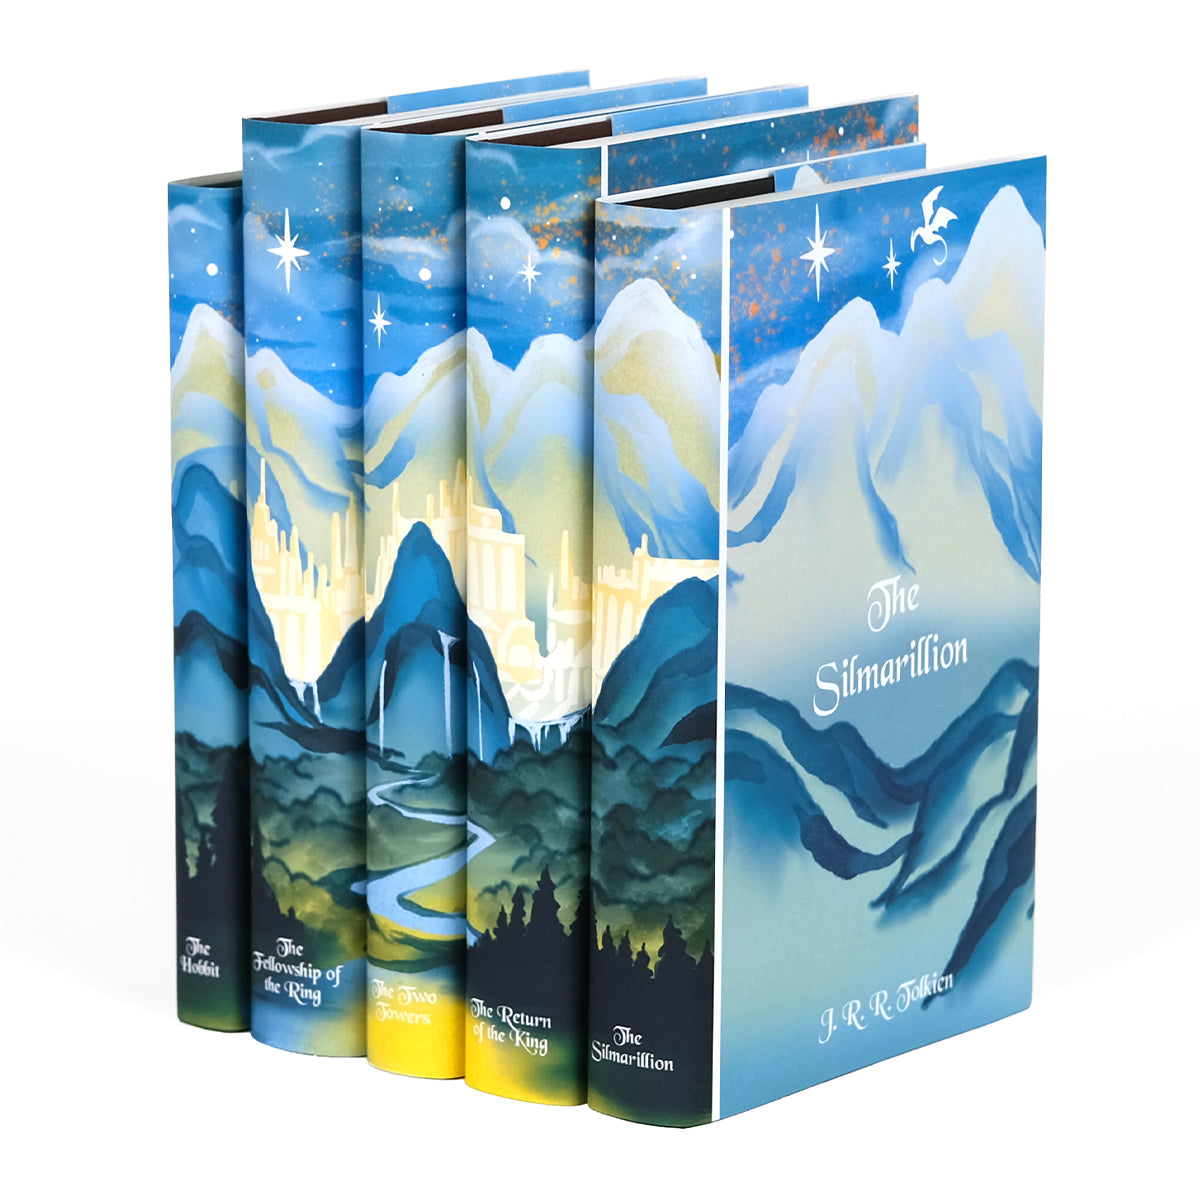 Customized Tolkien's Epic Journey: The Lord of the Rings Book Set